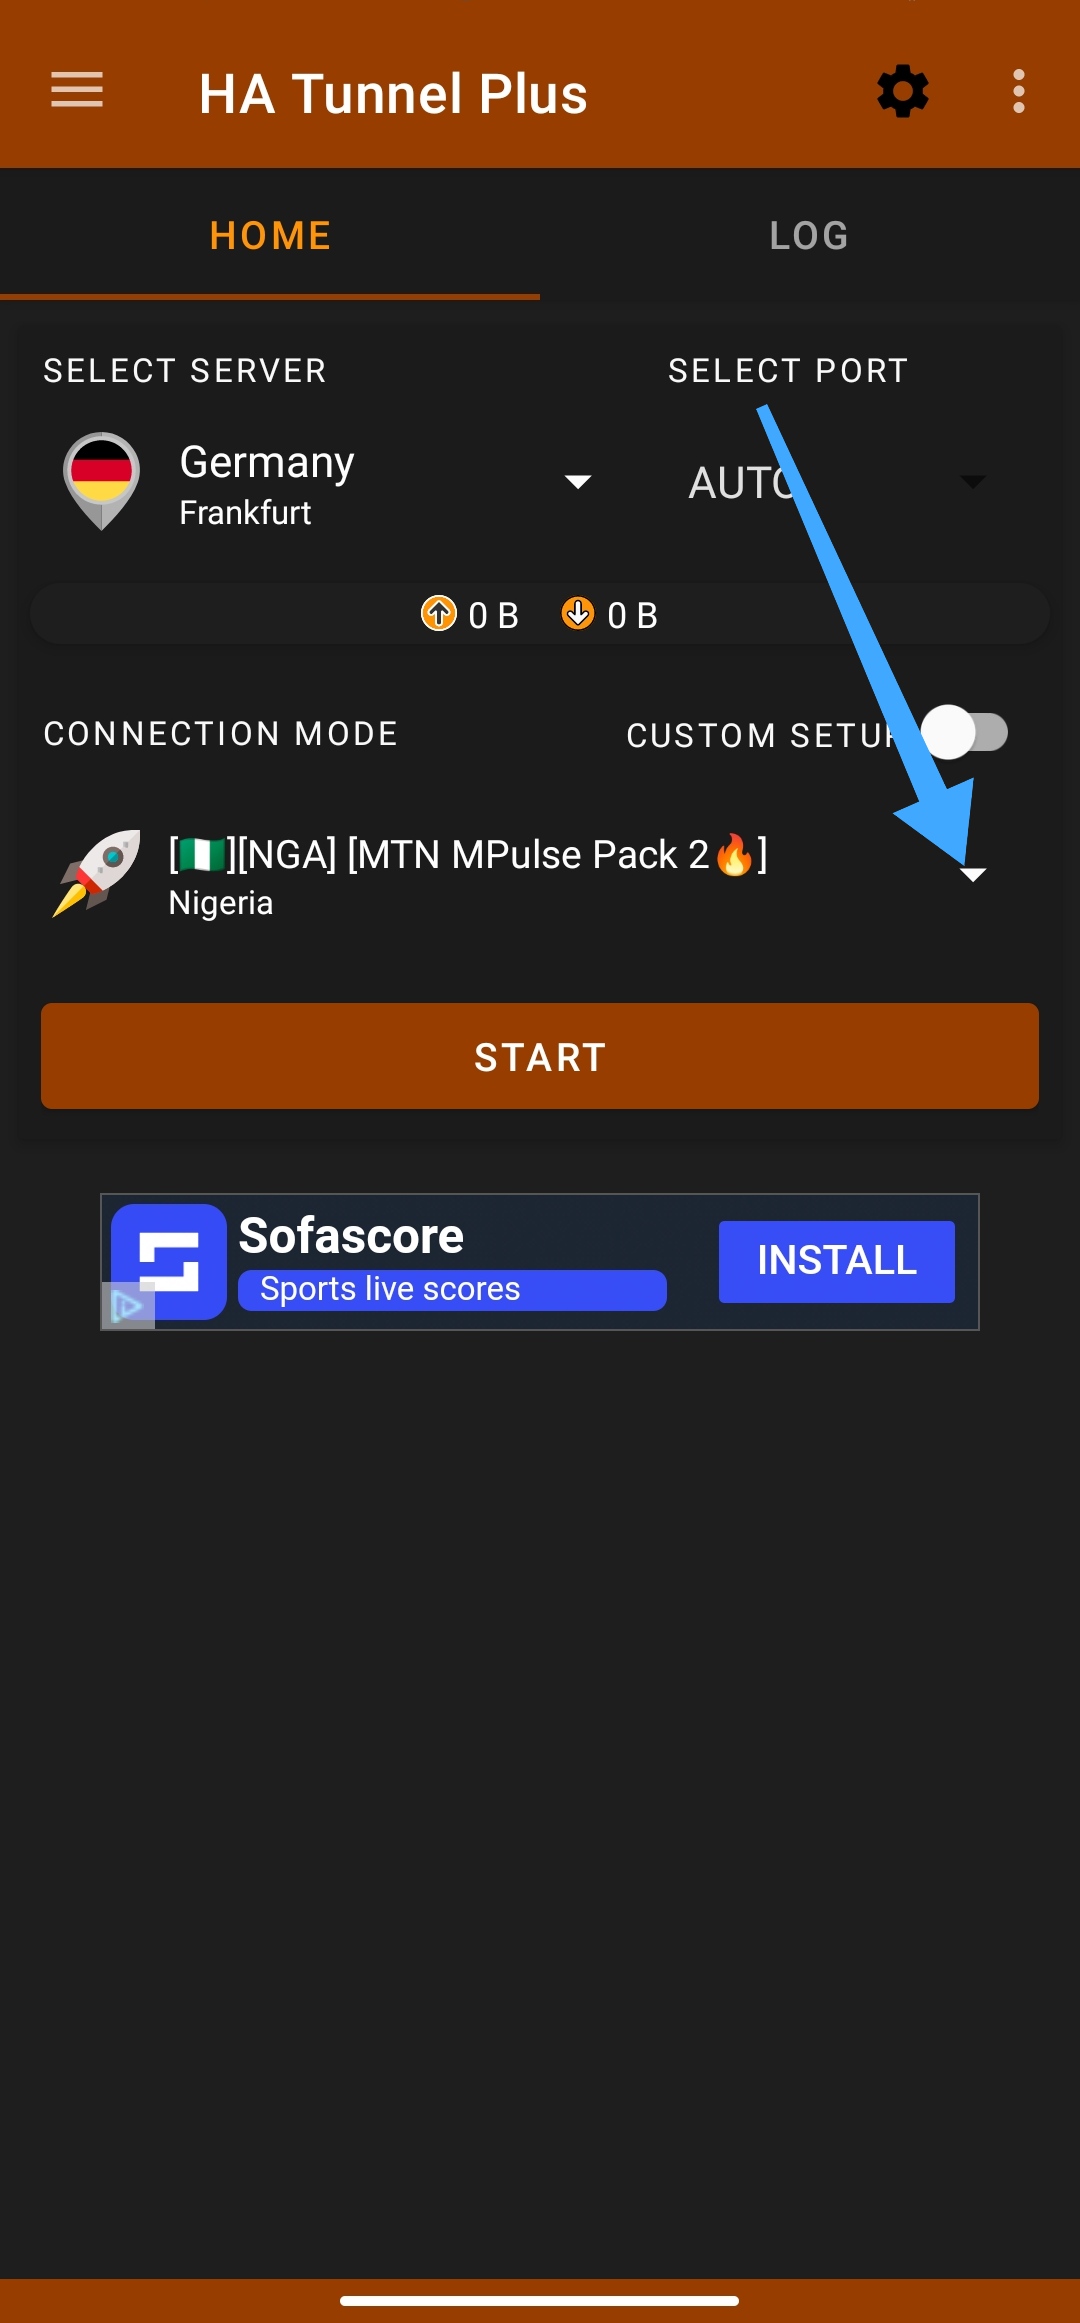 How To Power Up The Mtn 4GB Data For N500